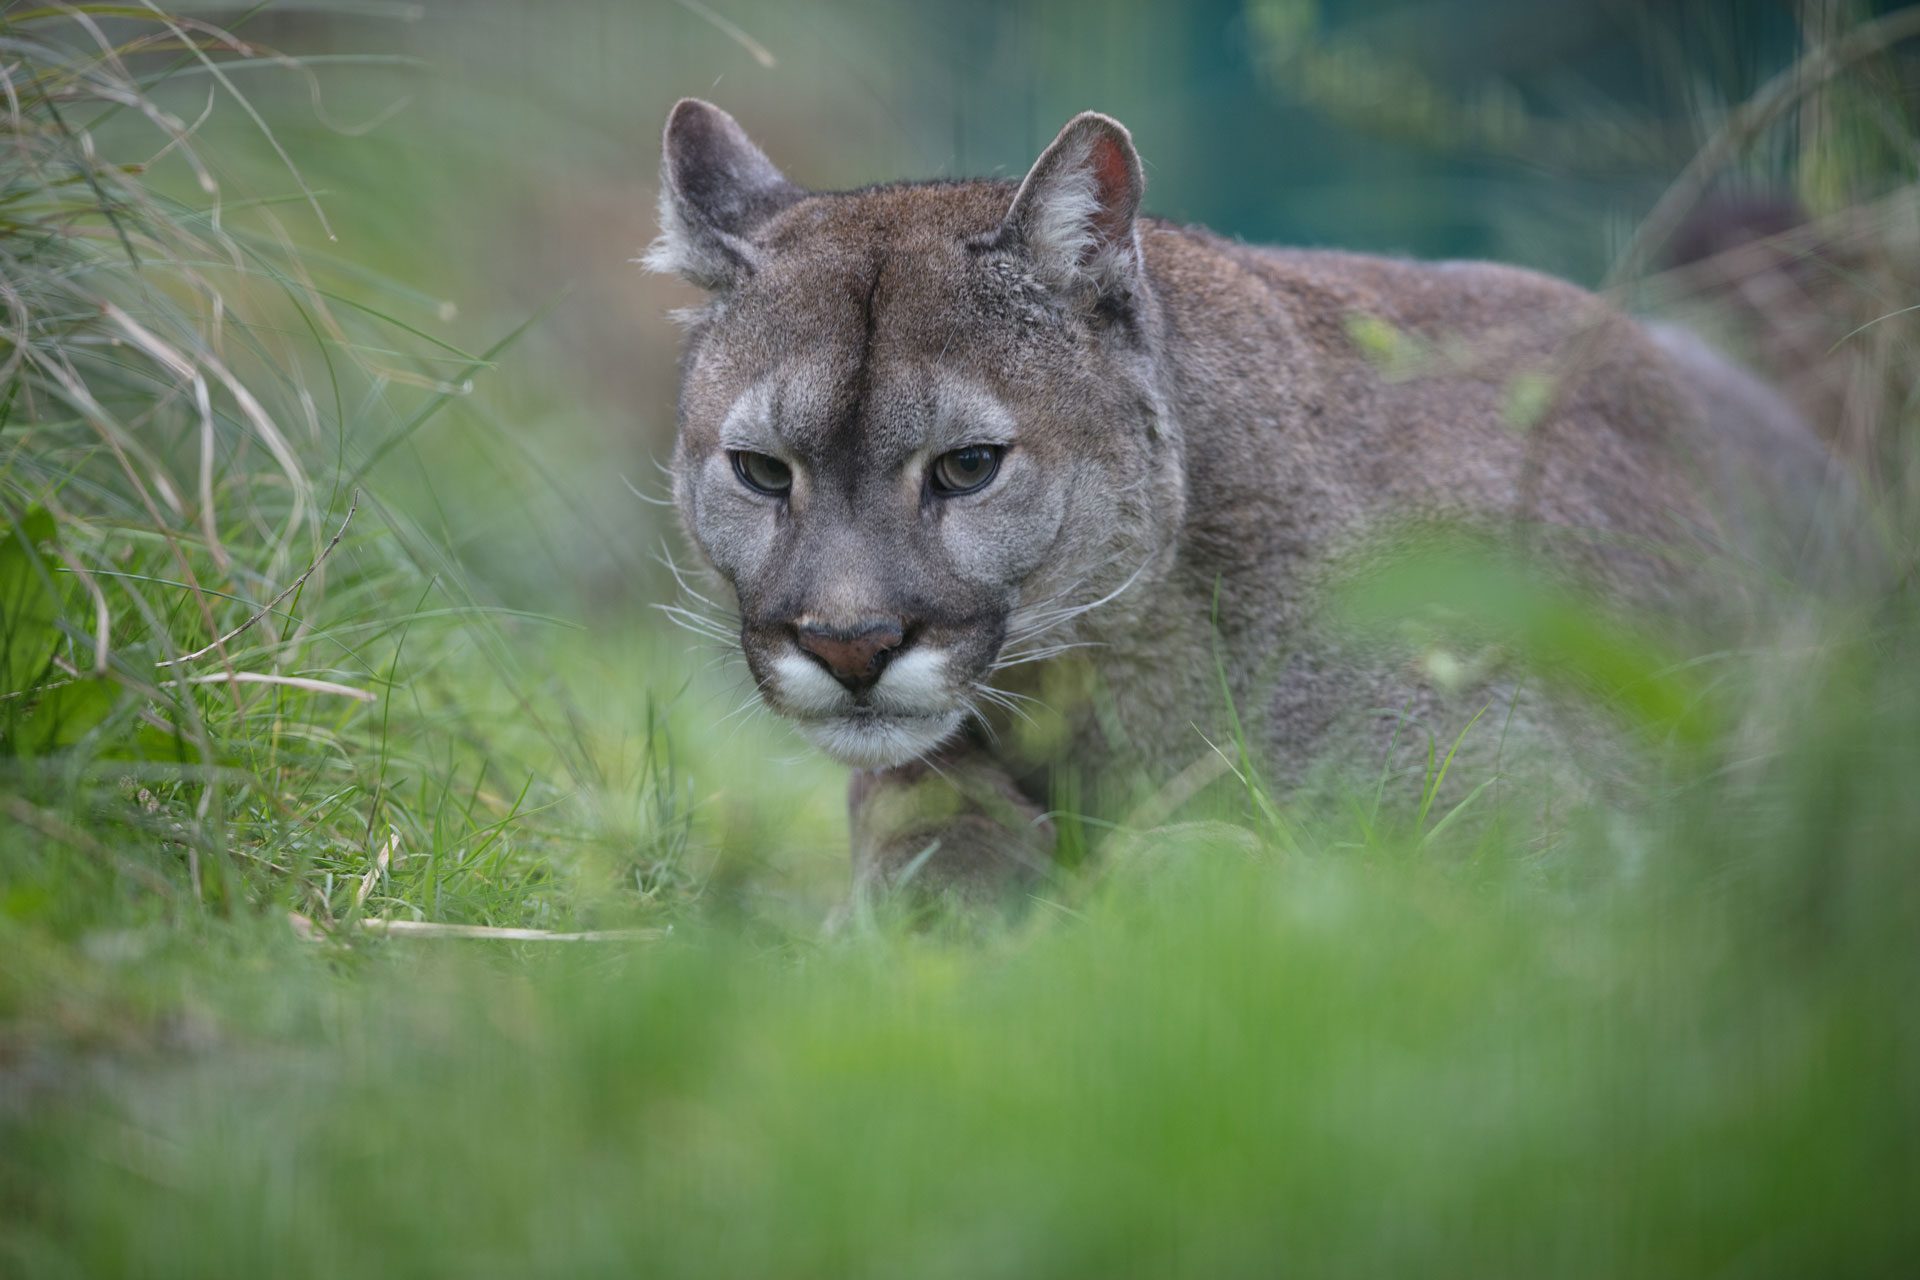 mountain lion crouched among grass at emerald park